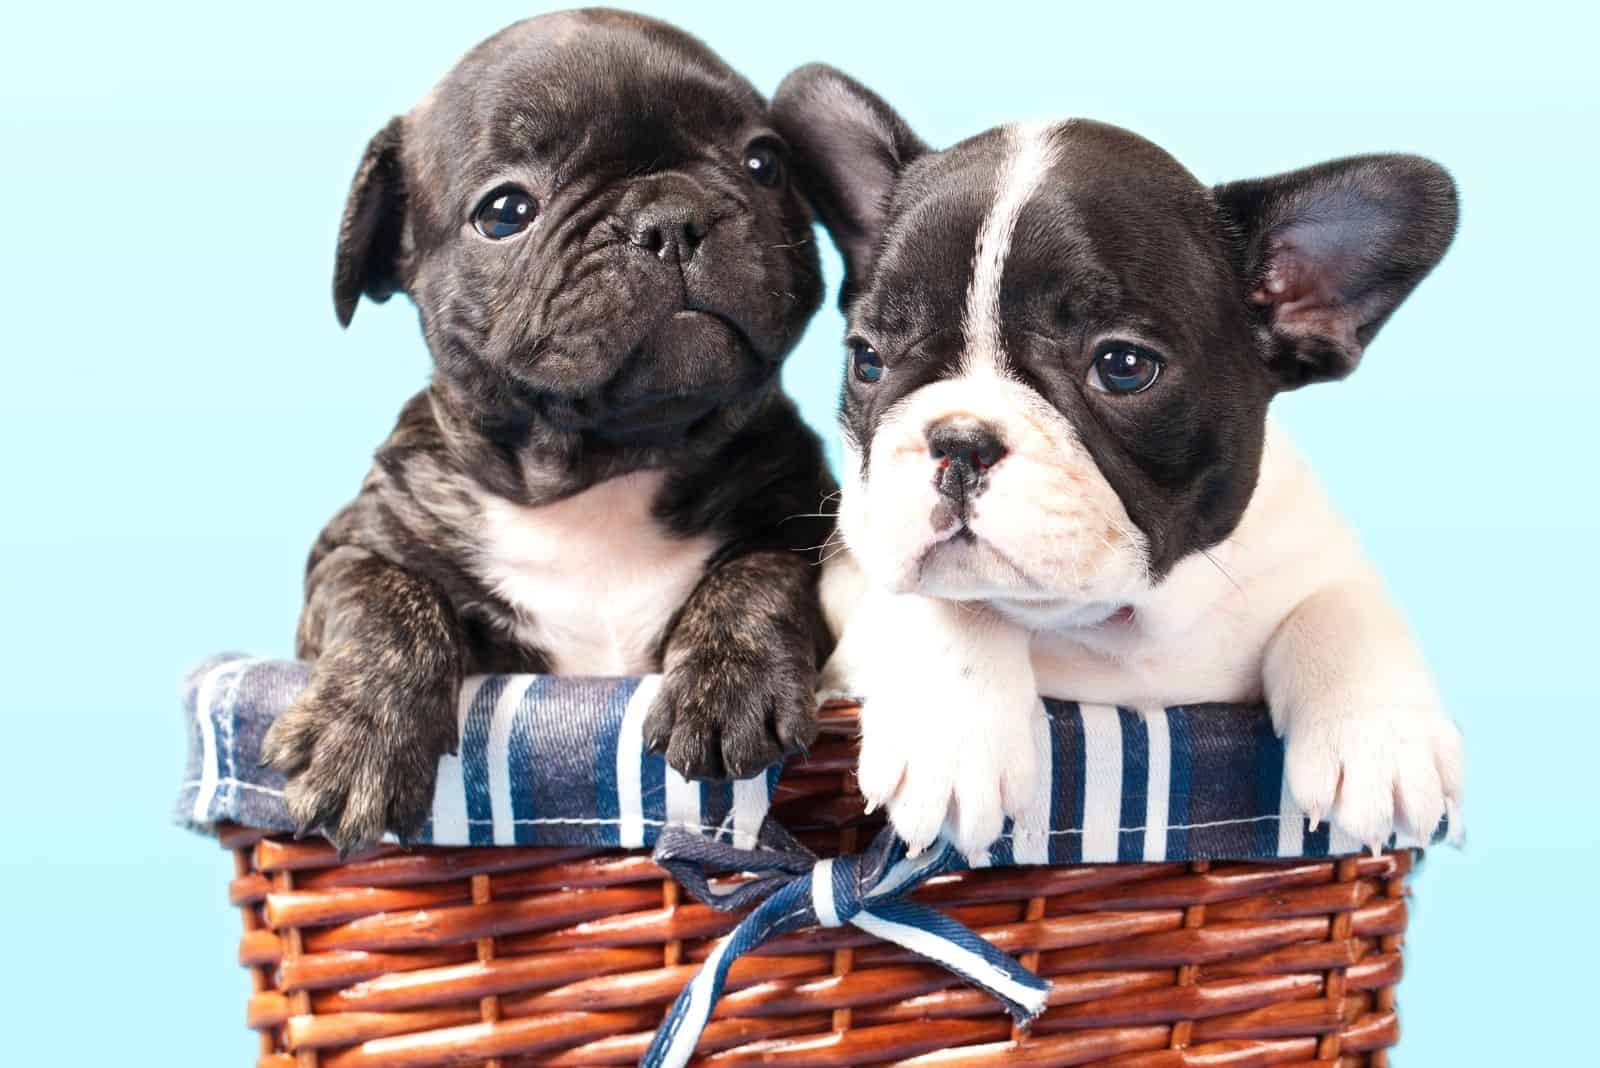 two puppy french bulldogs with black and white color inside a basket